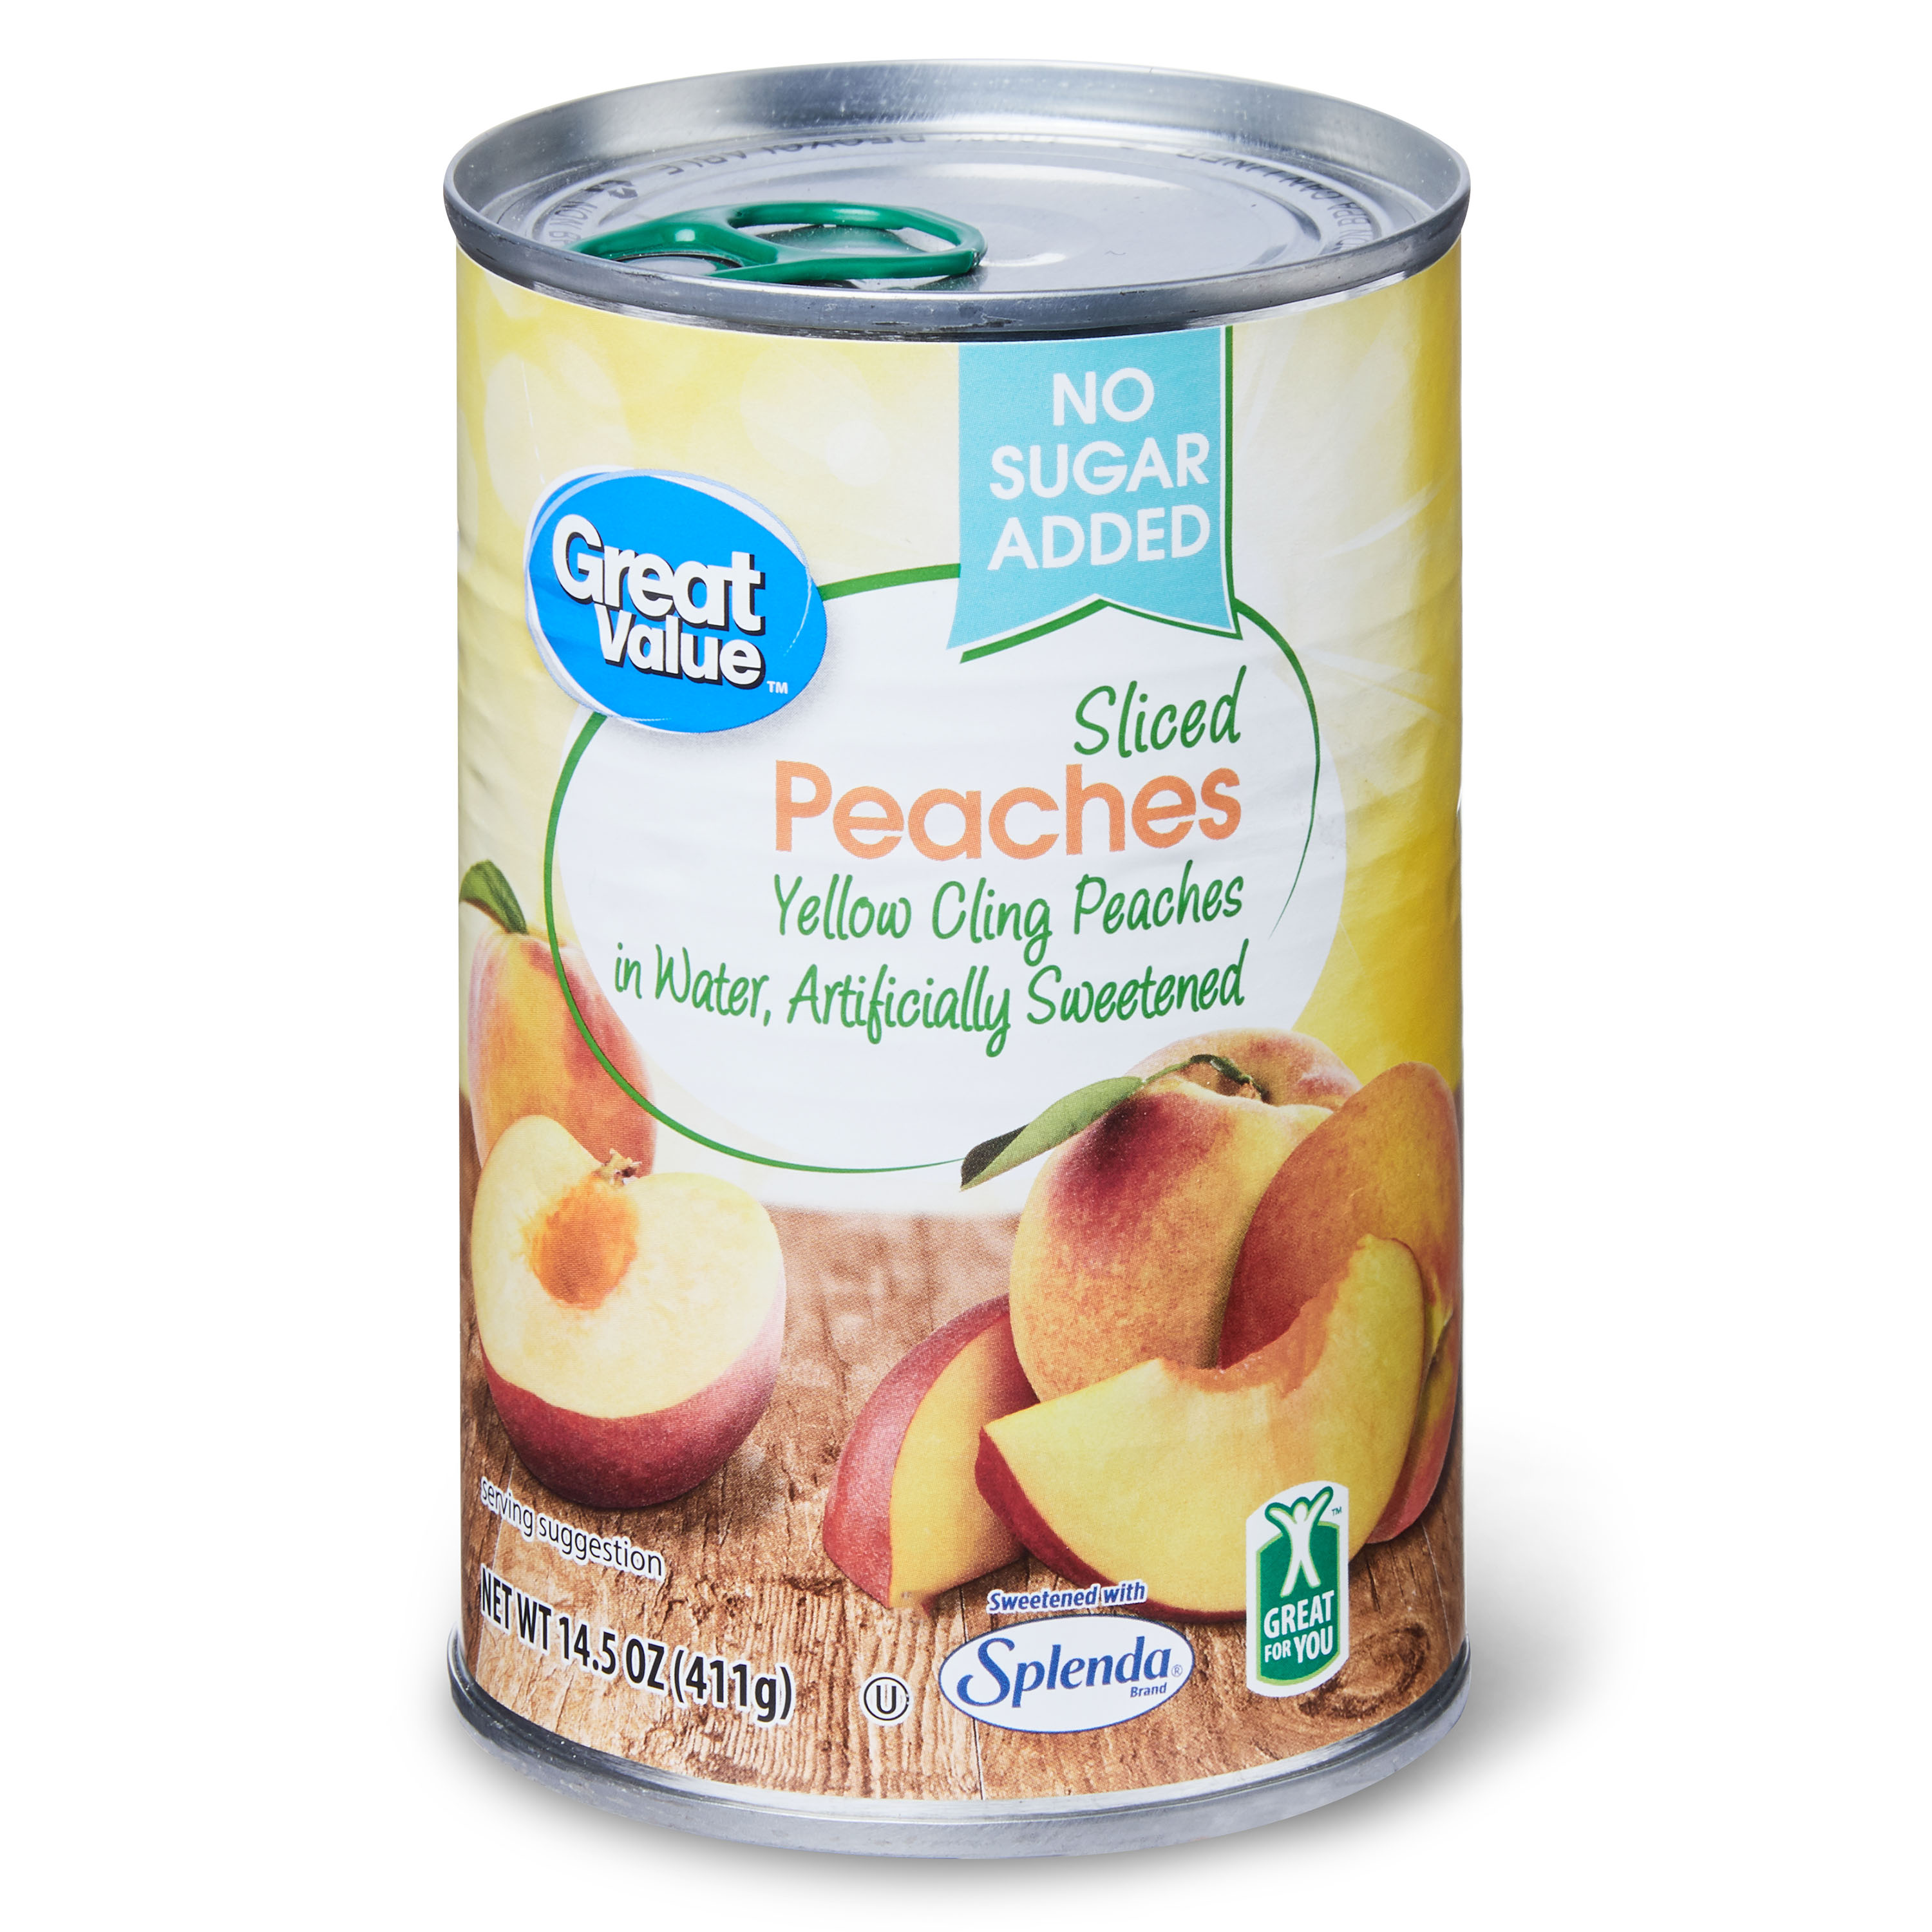 Great Value No Sugar Added Sliced Peaches, 14.5 Oz Image